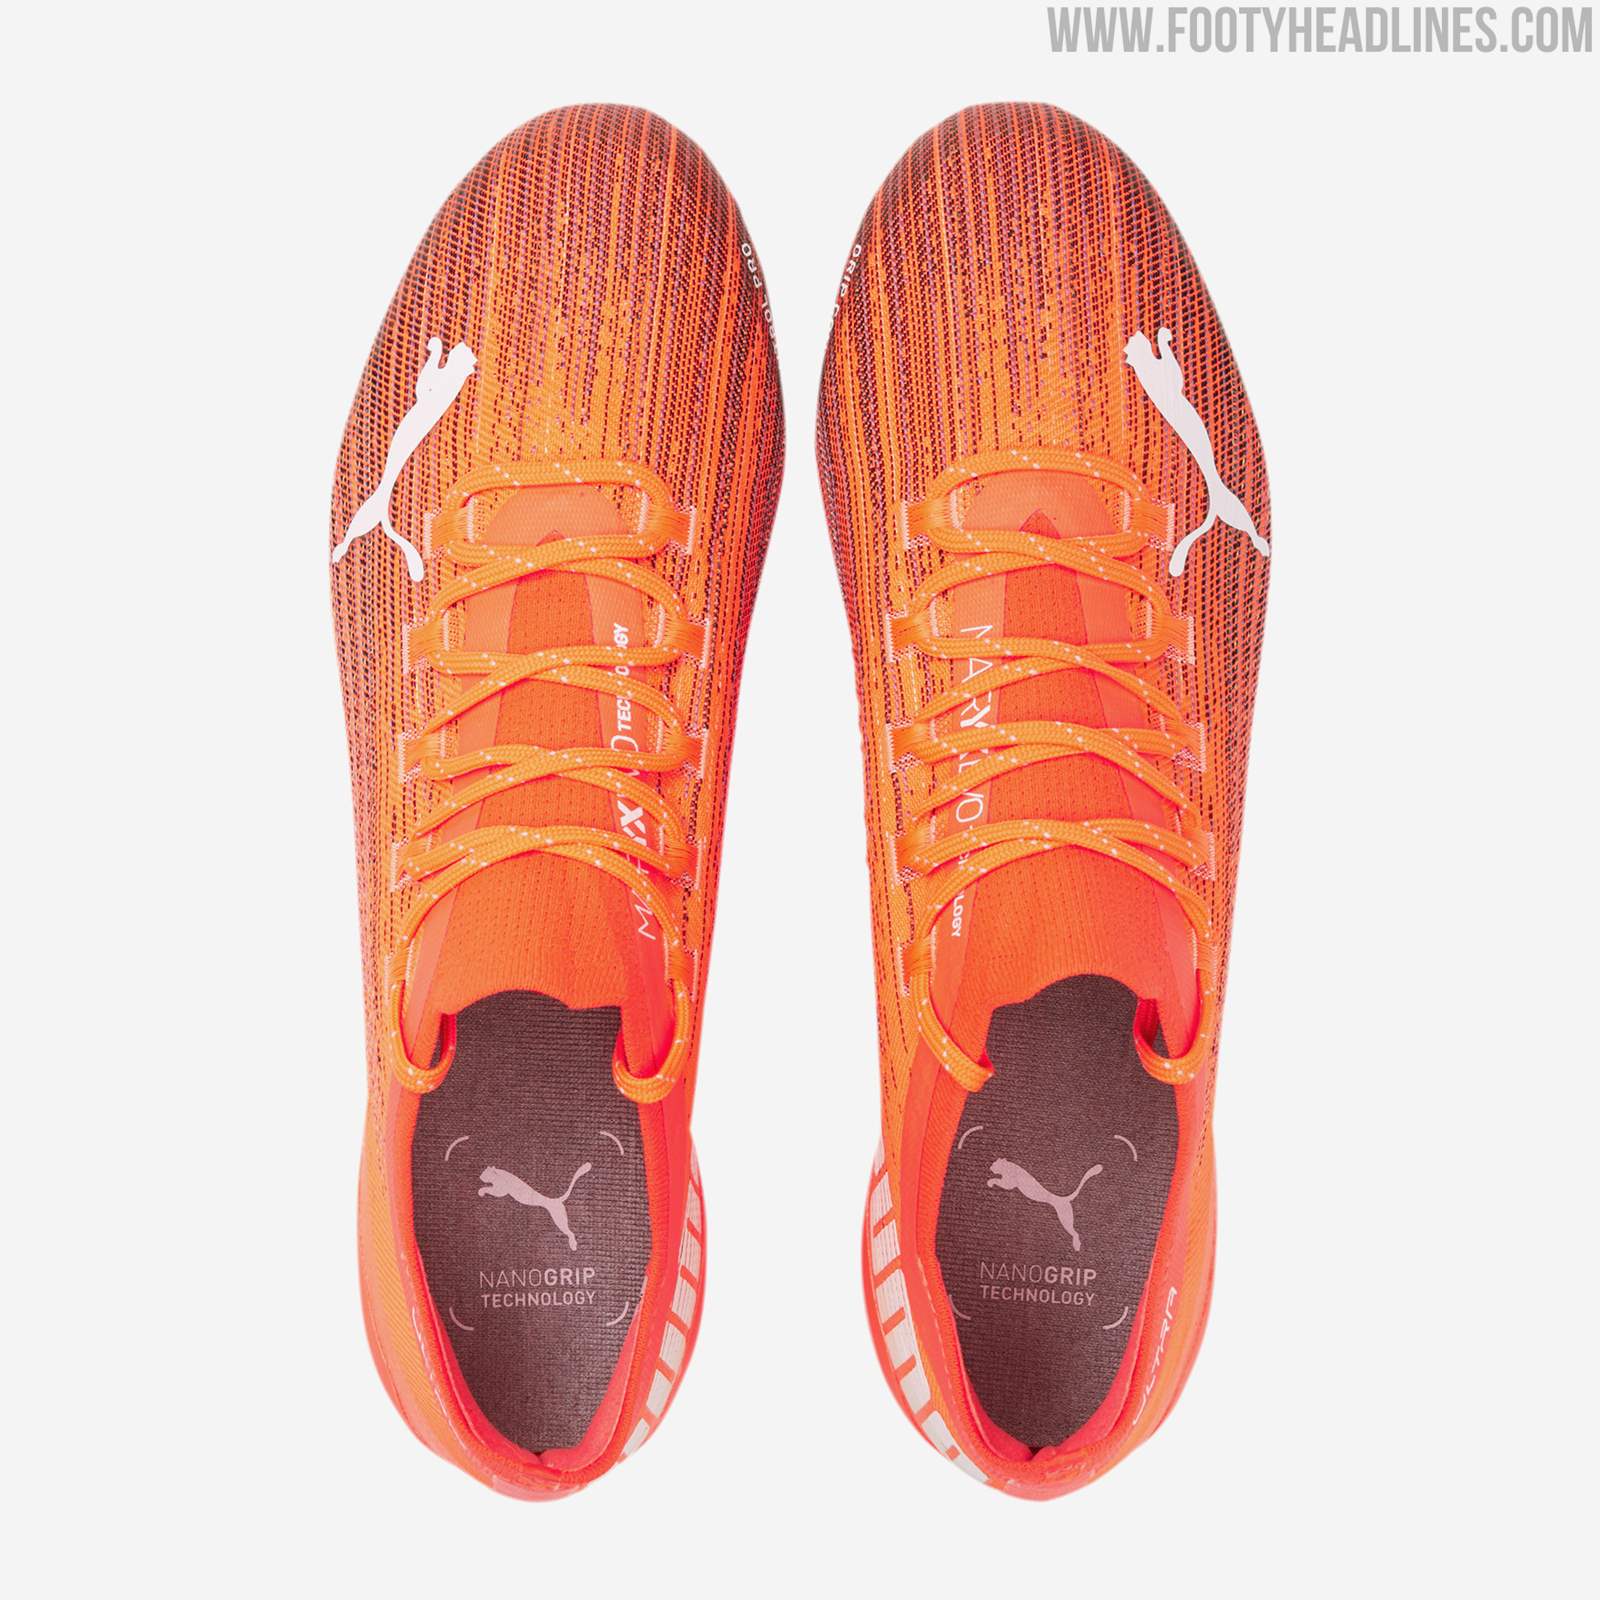 Speed Is Back: All-New Puma Ultra 2020 Boots Revealed - Puma ONE ...